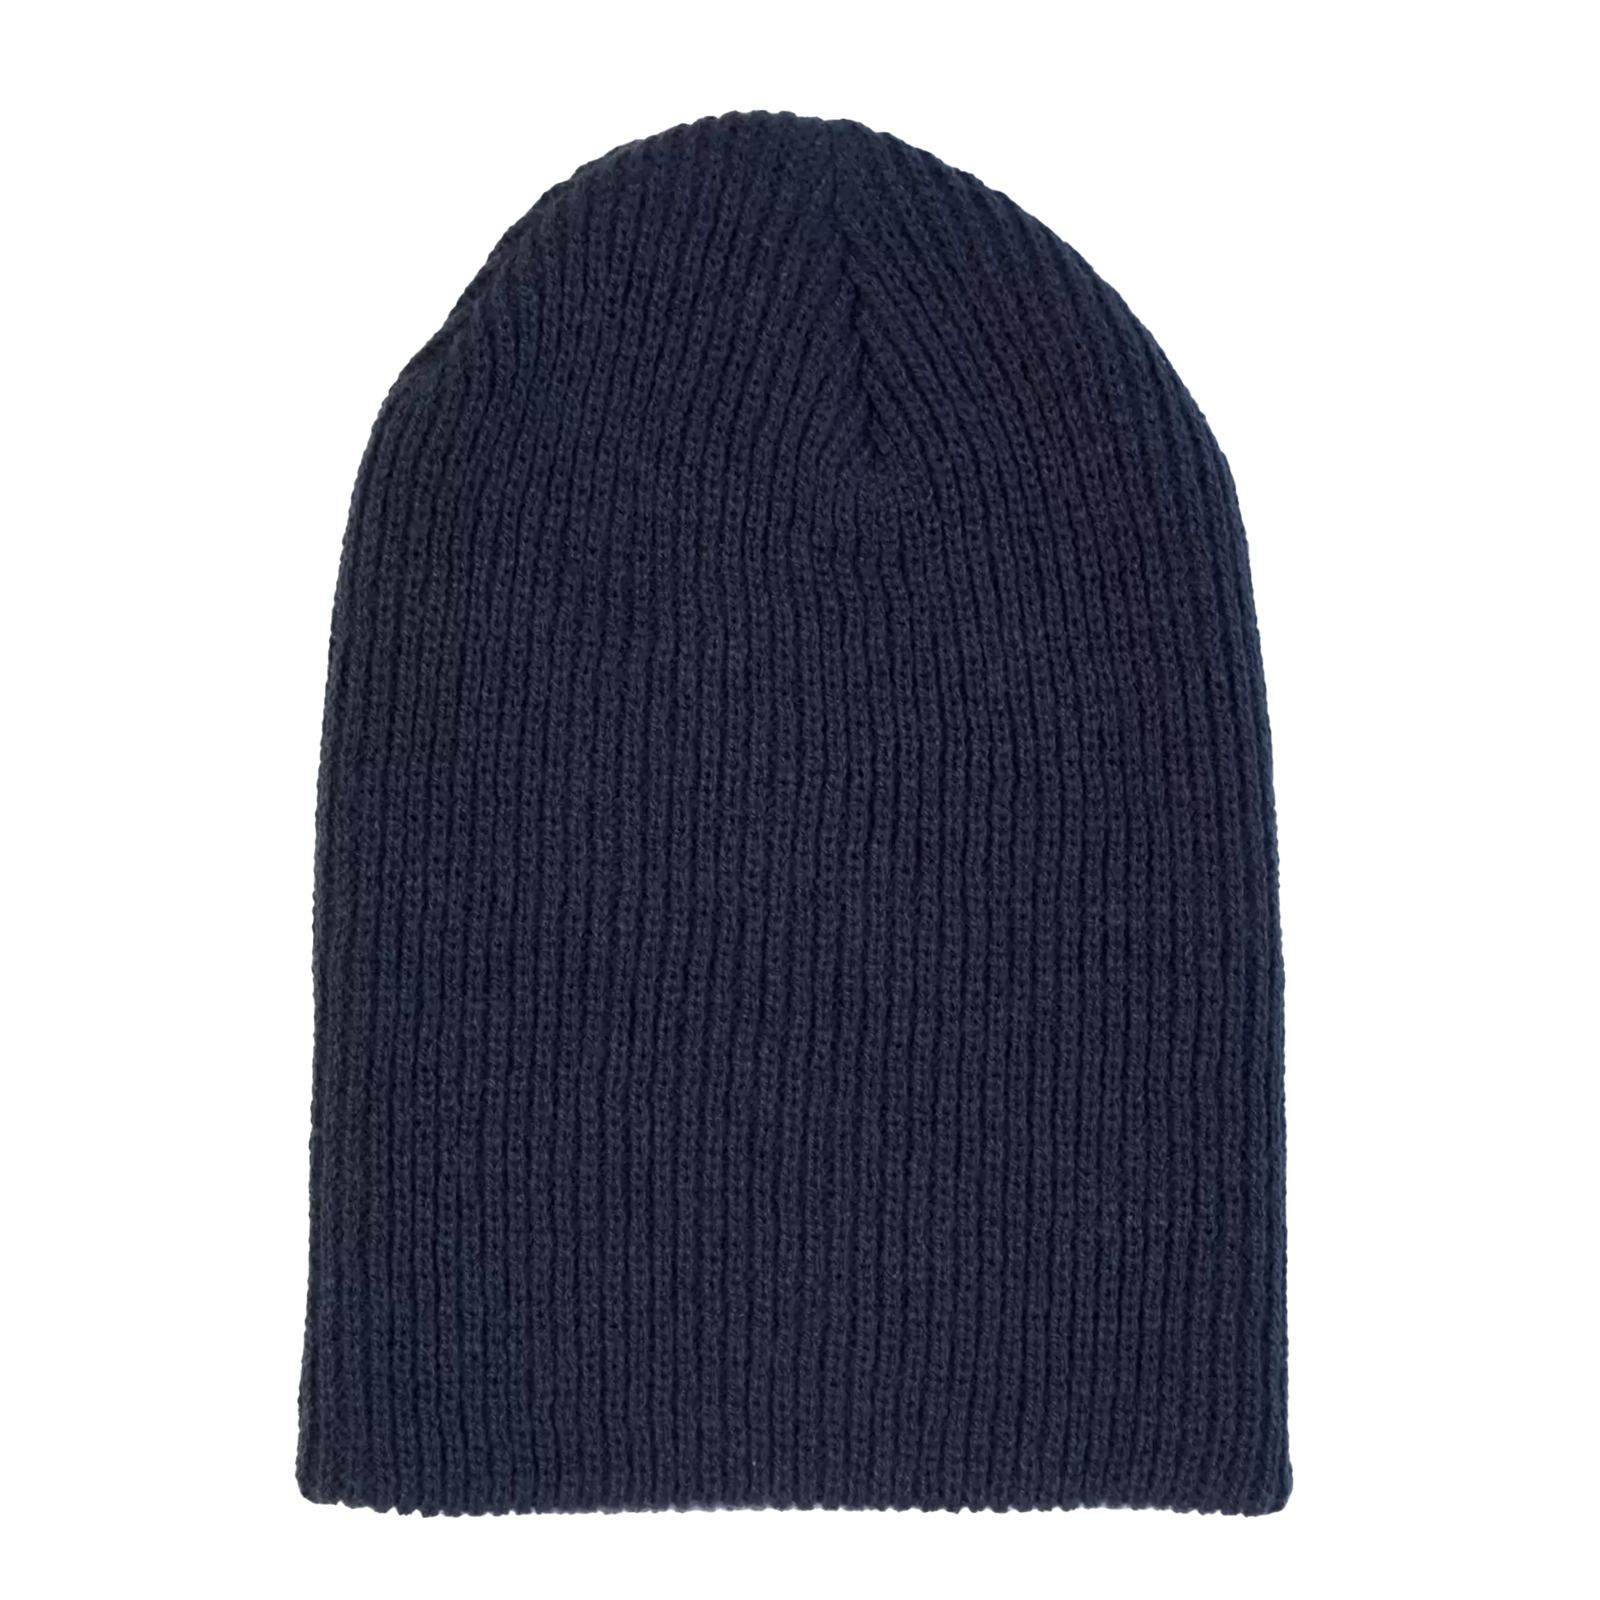 ATC Everyday Rib Knit Slouch Beanie - Adult Unisex One Size Fits All - Navy